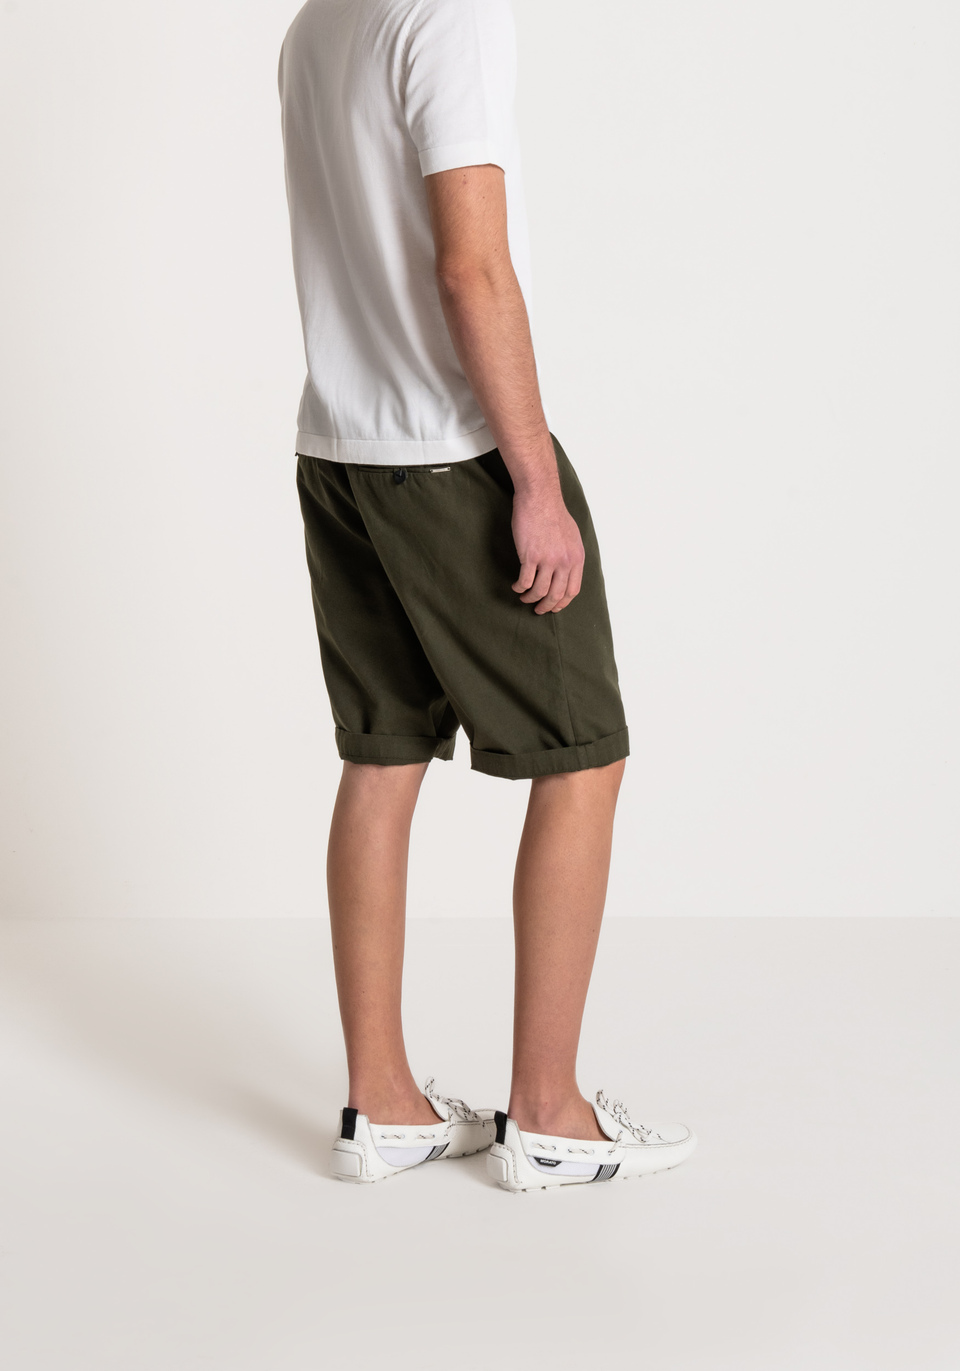 CARROT-FIT SHORTS IN 100% COTTON CANVAS WITH AN ELASTICATED DRAWSTRING WAIST - Antony Morato Online Shop